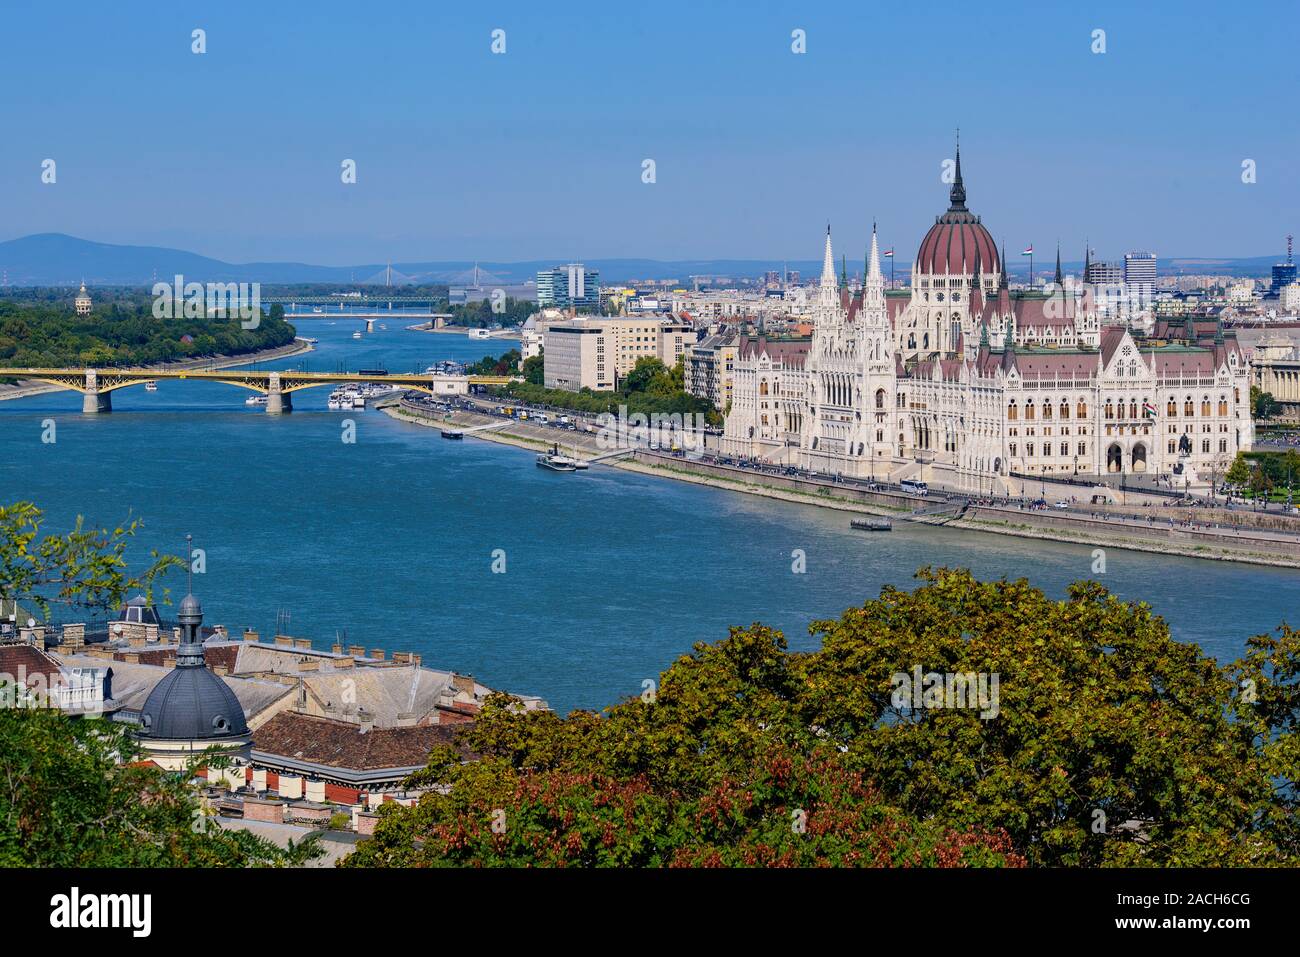 Hungarian Parliament Building on the banks of the Danube, Budapest, Hungary Stock Photo